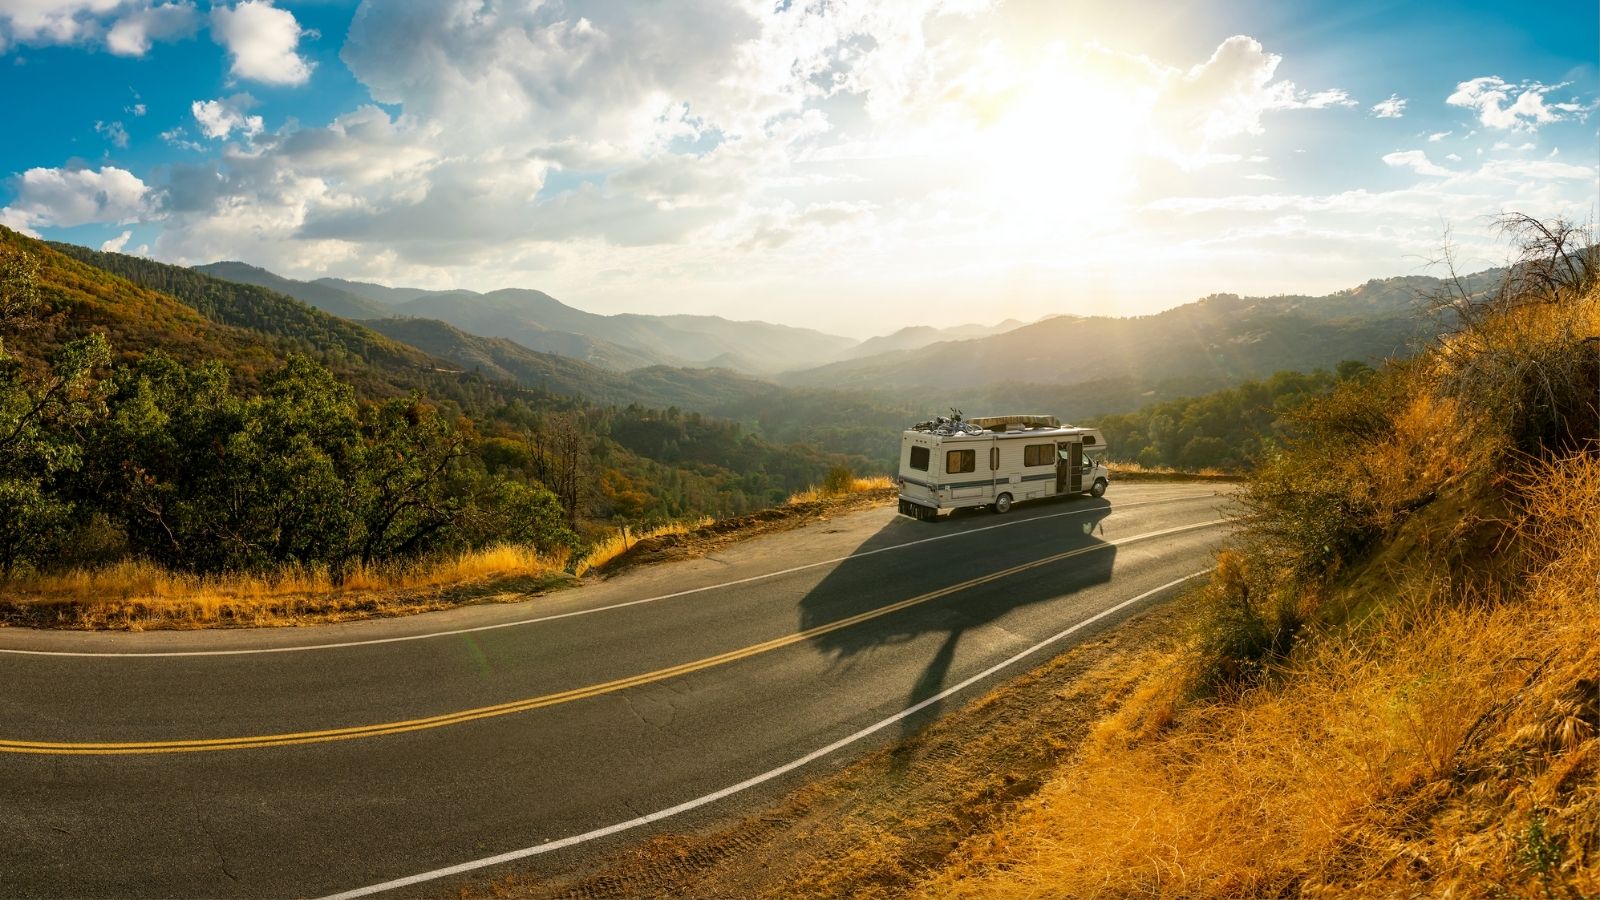 11 Family Road Trip Ideas Every Kid Will Love